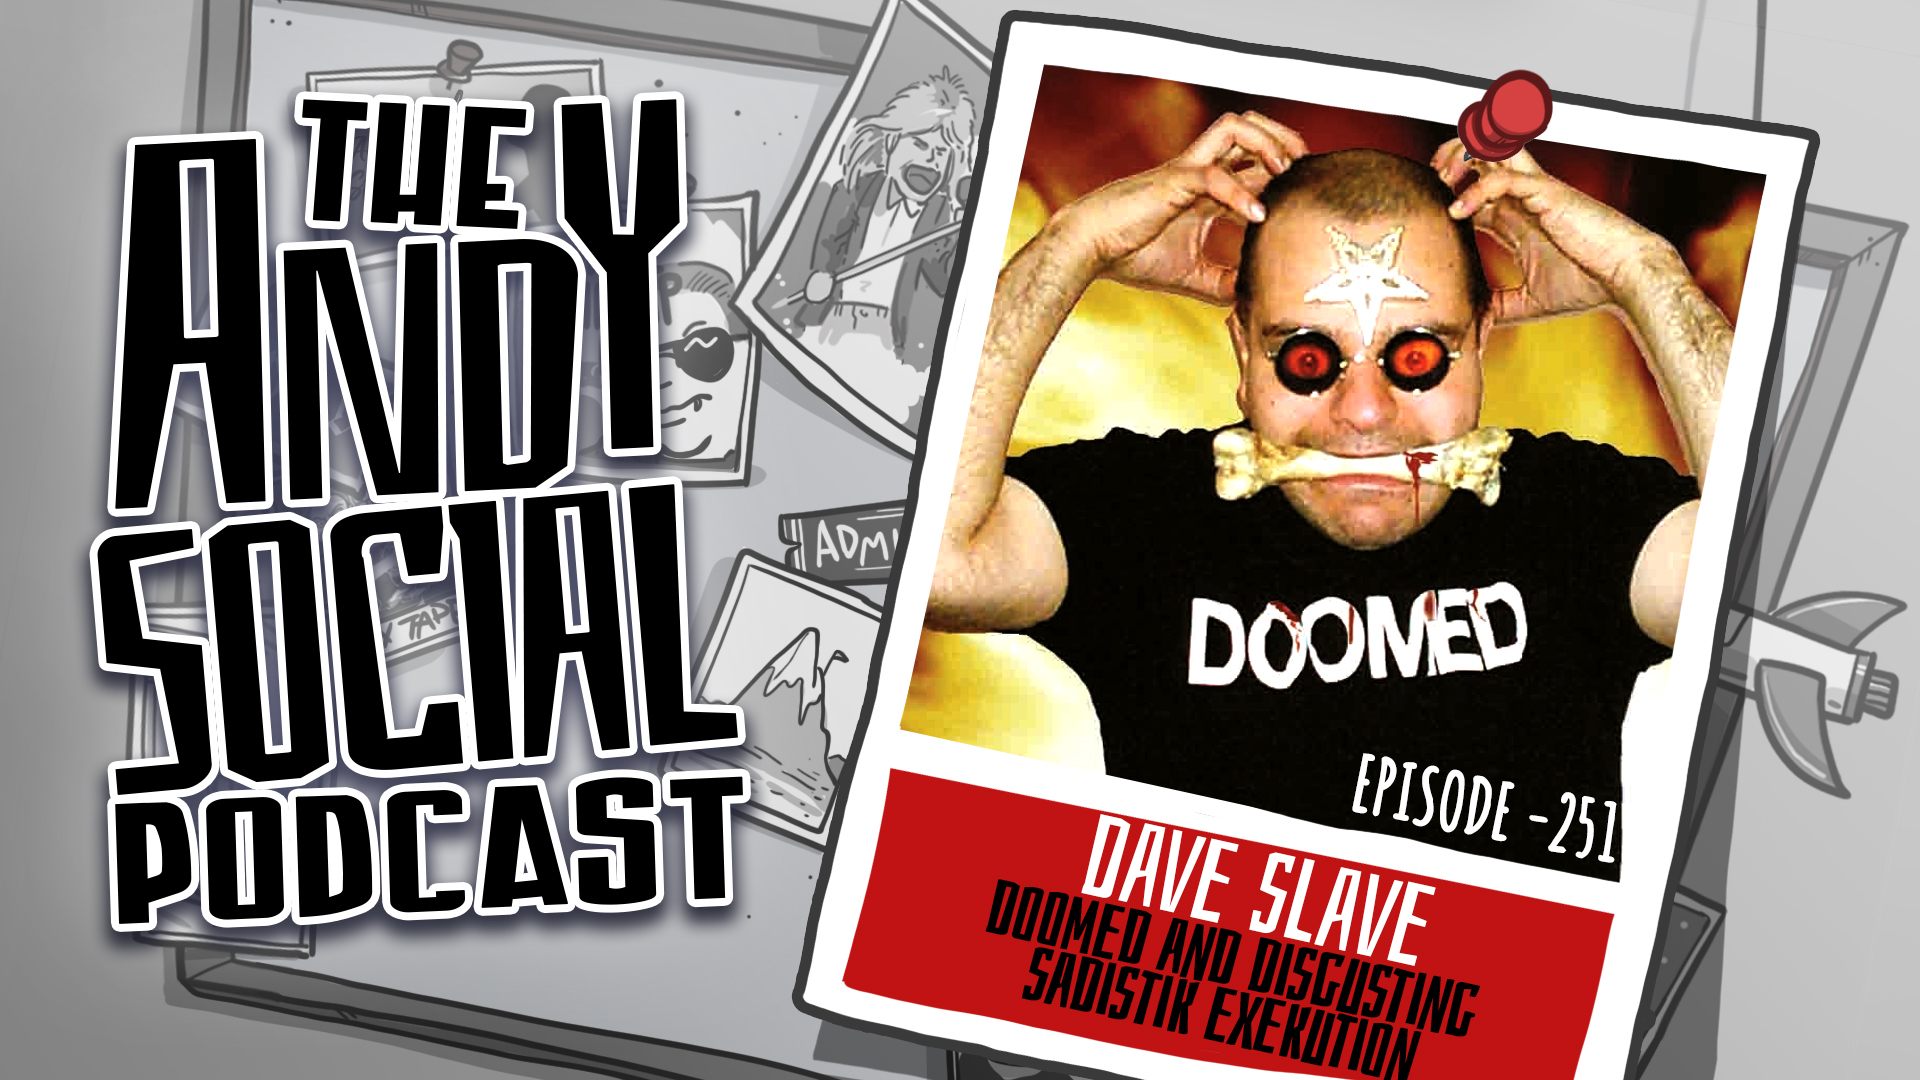 251 - Dave Slave (Doomed and Digusting, Sadistik Exekution) - The Andy ...